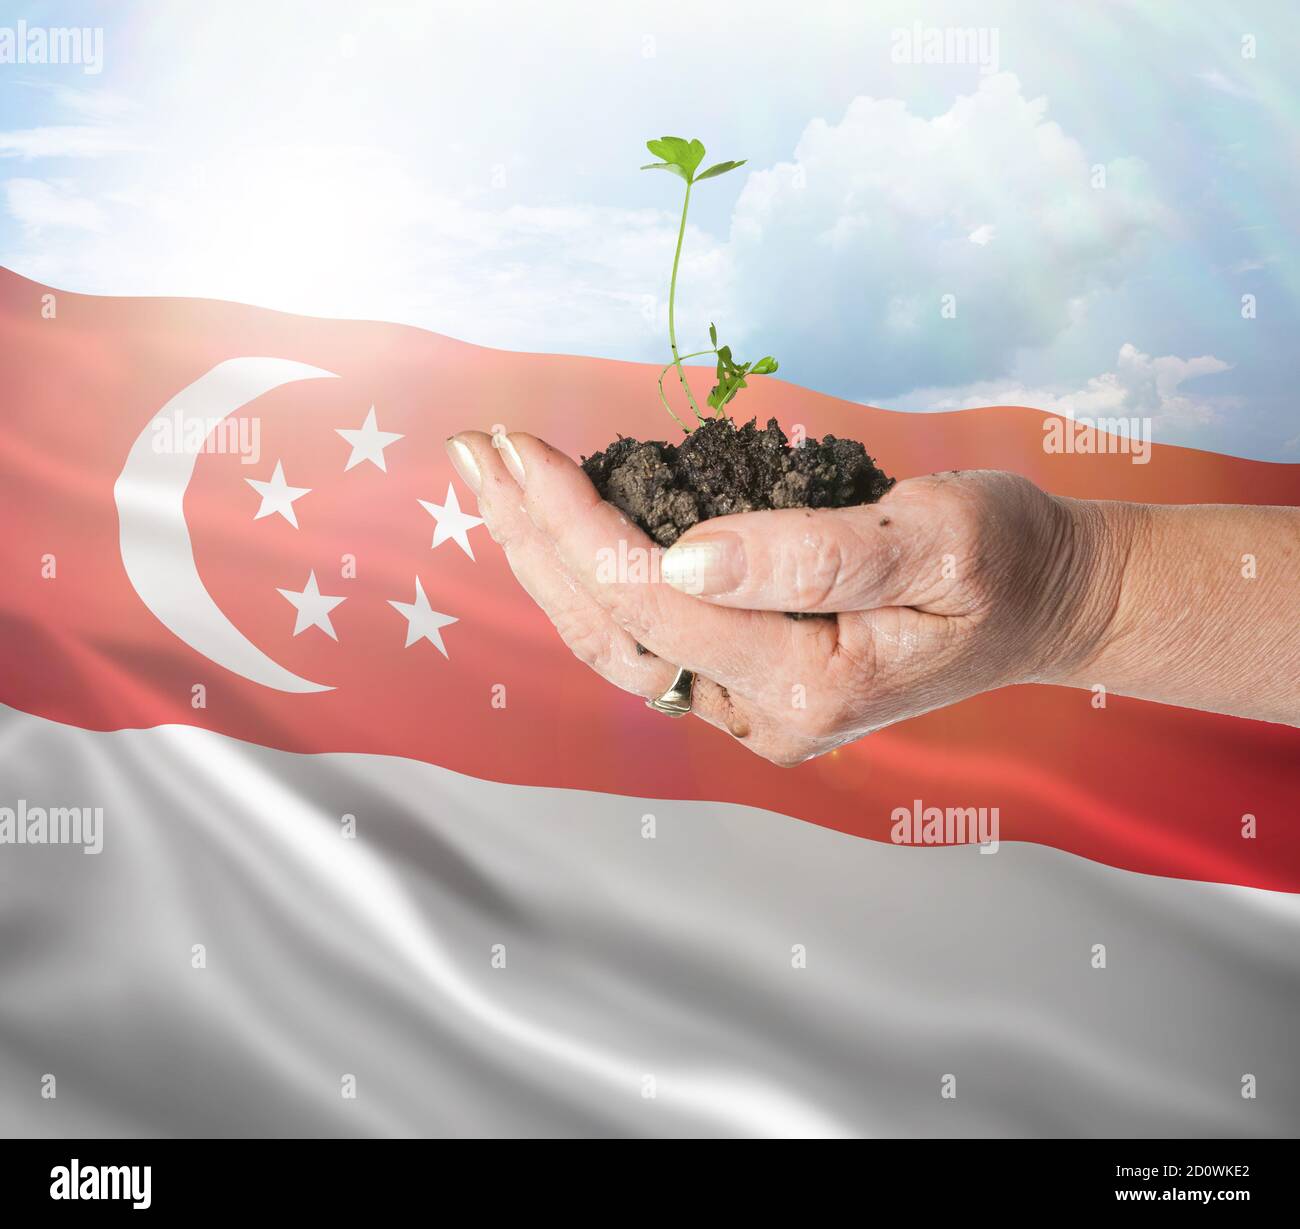 Singapore growth and new beginning. Green renewable energy and ecology concept. Hand holding young plant. Stock Photo